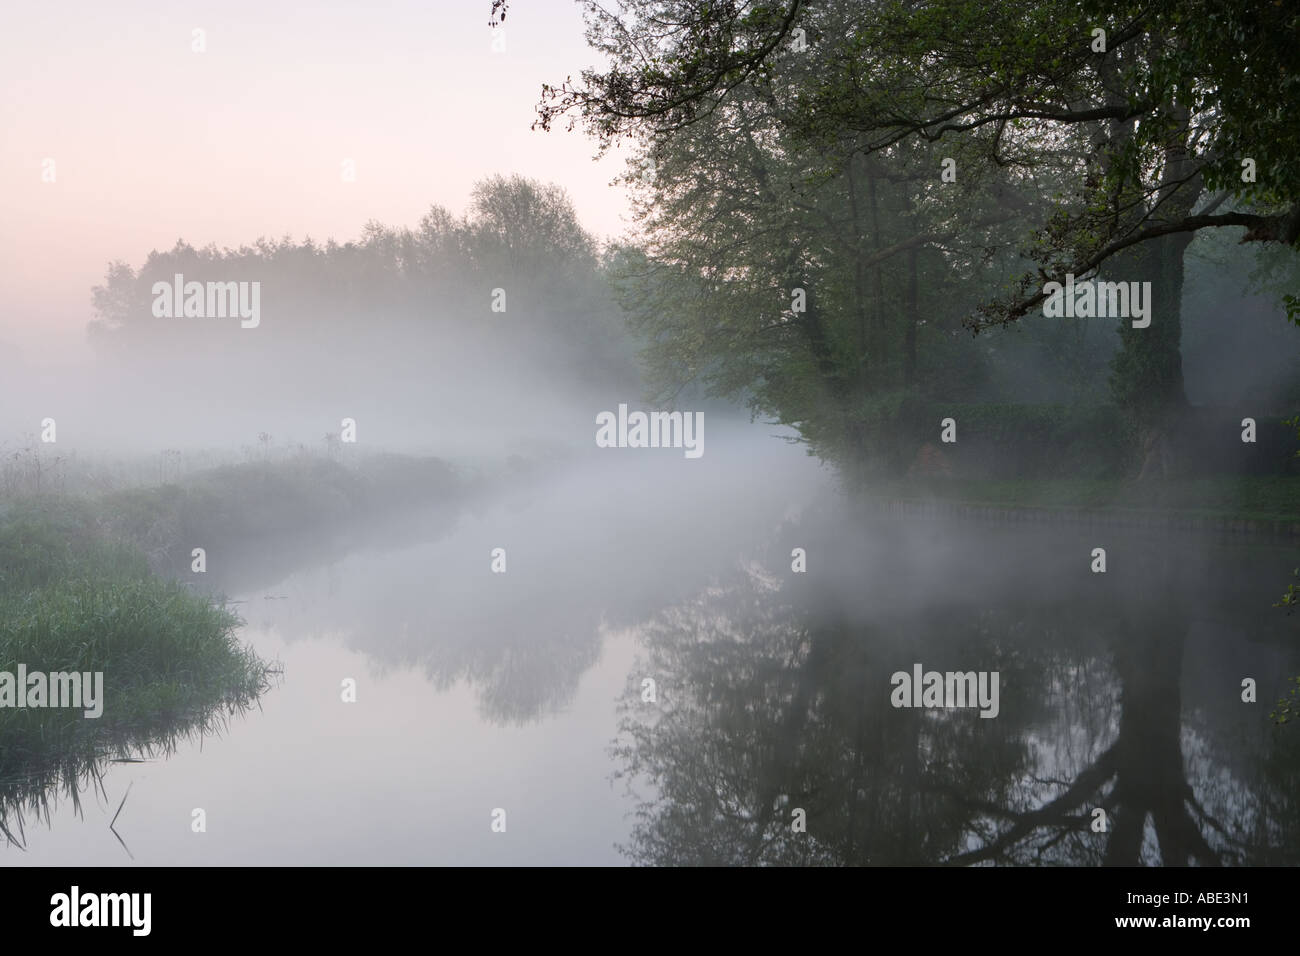 Misty spring dawn by Bower's Lock, River Wey, Guildford, Surrey, England, UK Stock Photo